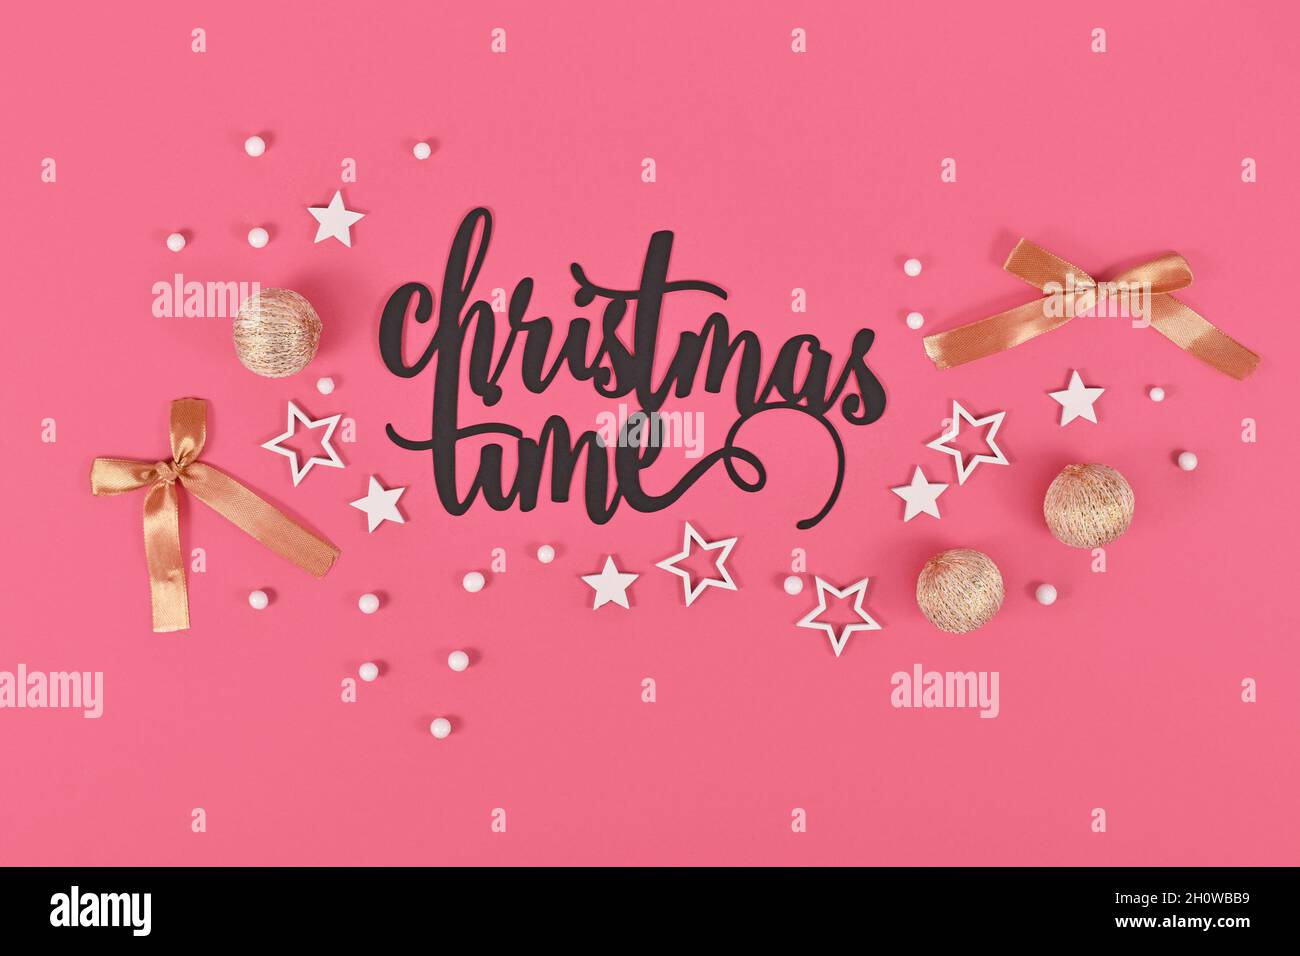 Black 'Christmas time' text next to golden and white bauble and star ornaments on pink background Stock Photo